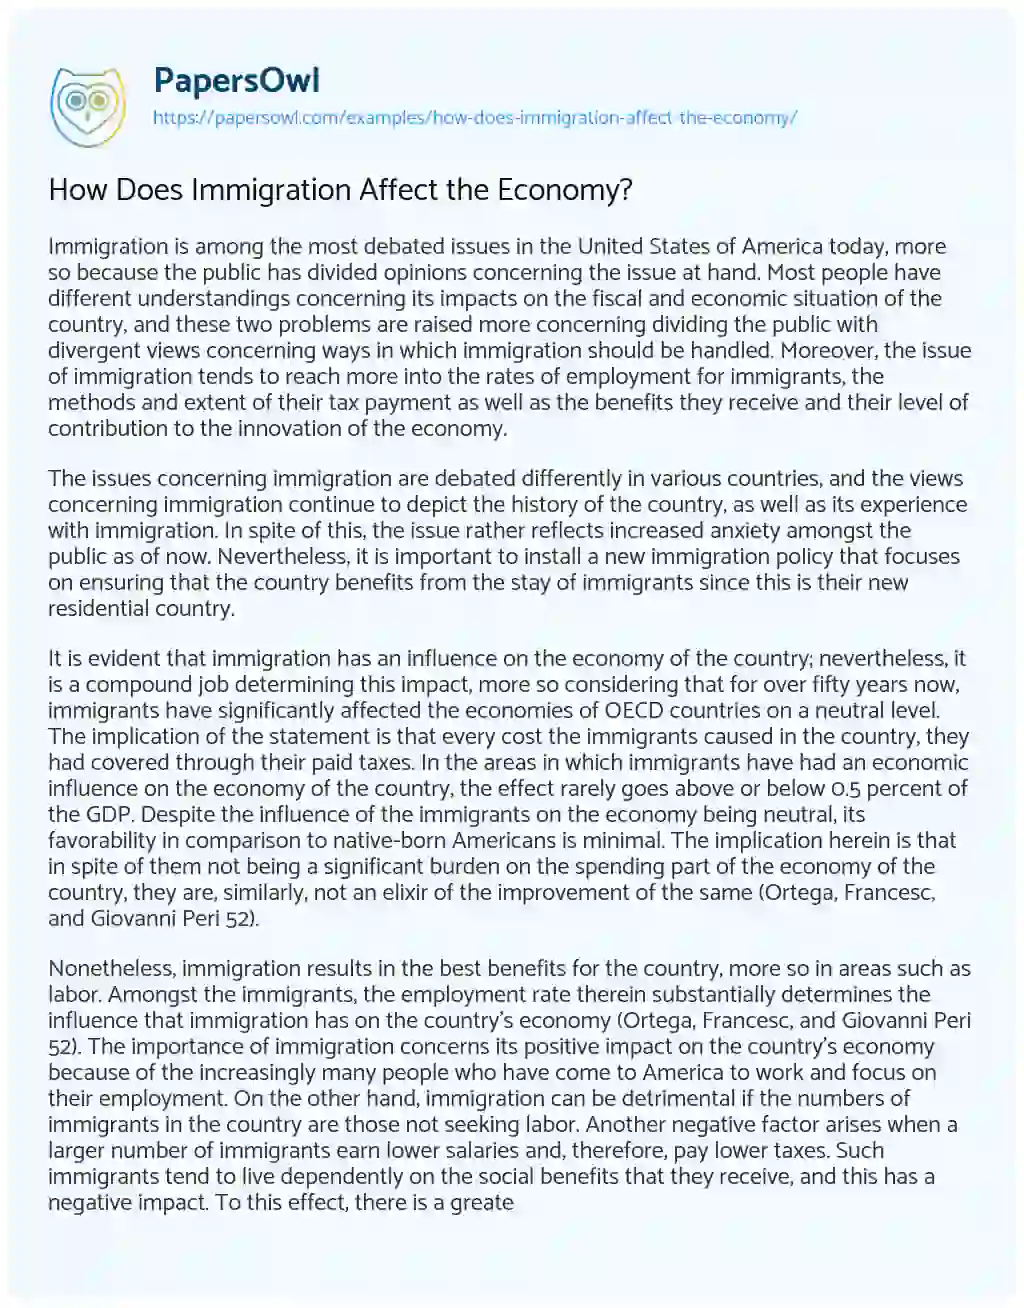 Essay on How does Immigration Affect the Economy?